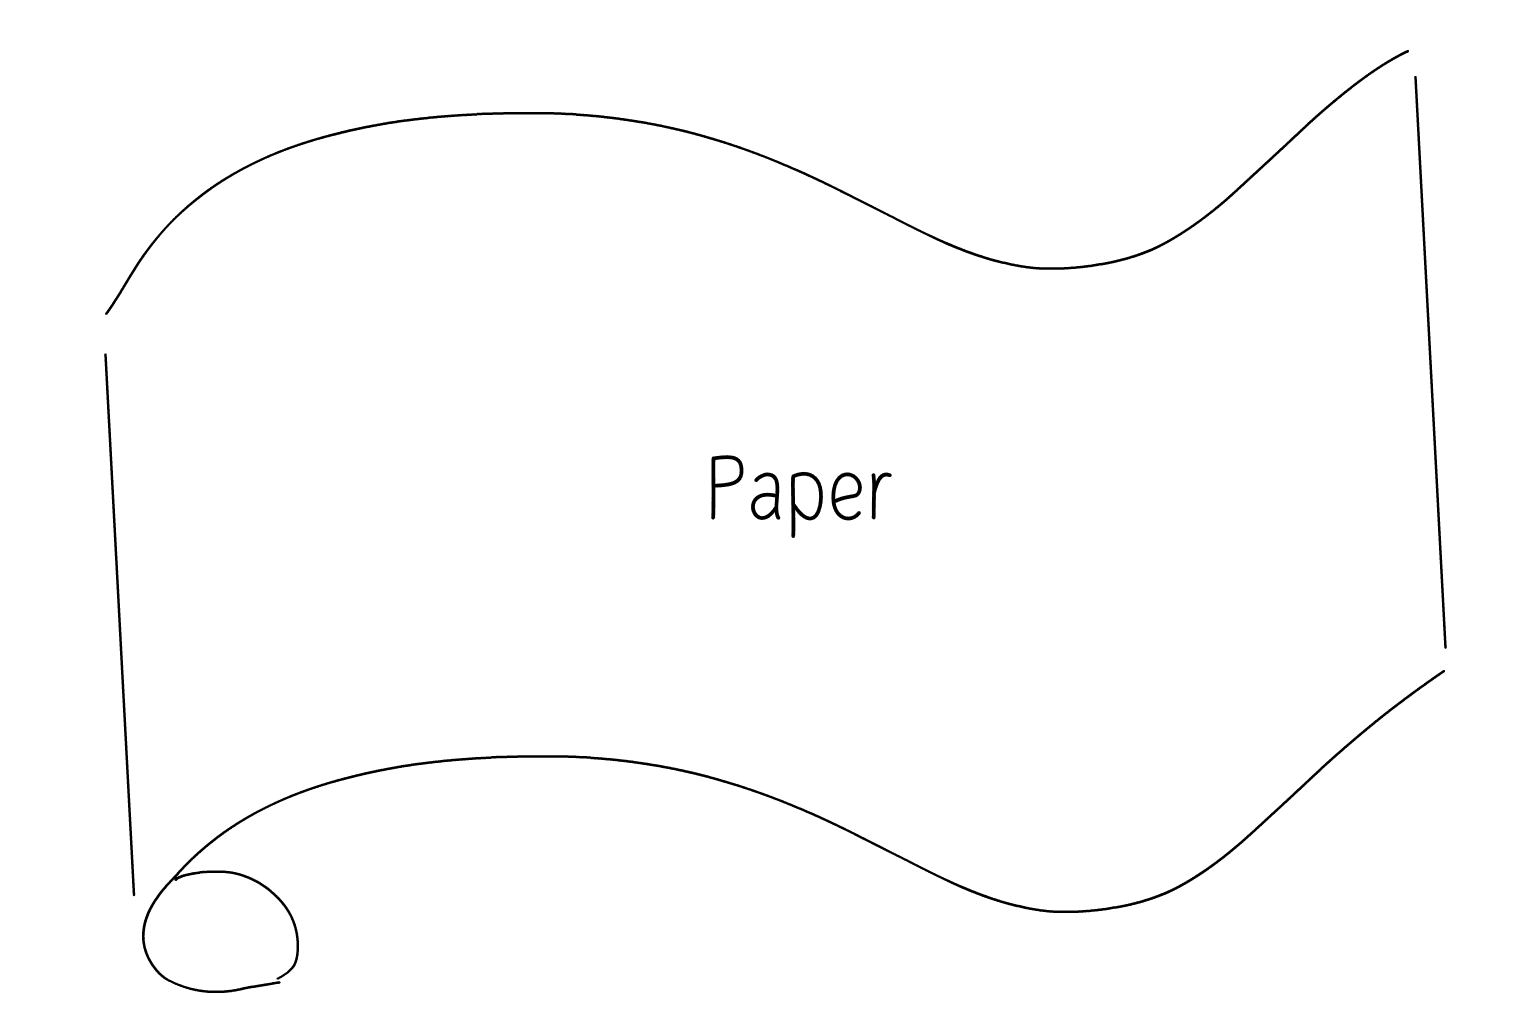 Illustration of Wedding Invitations and Paper Goods